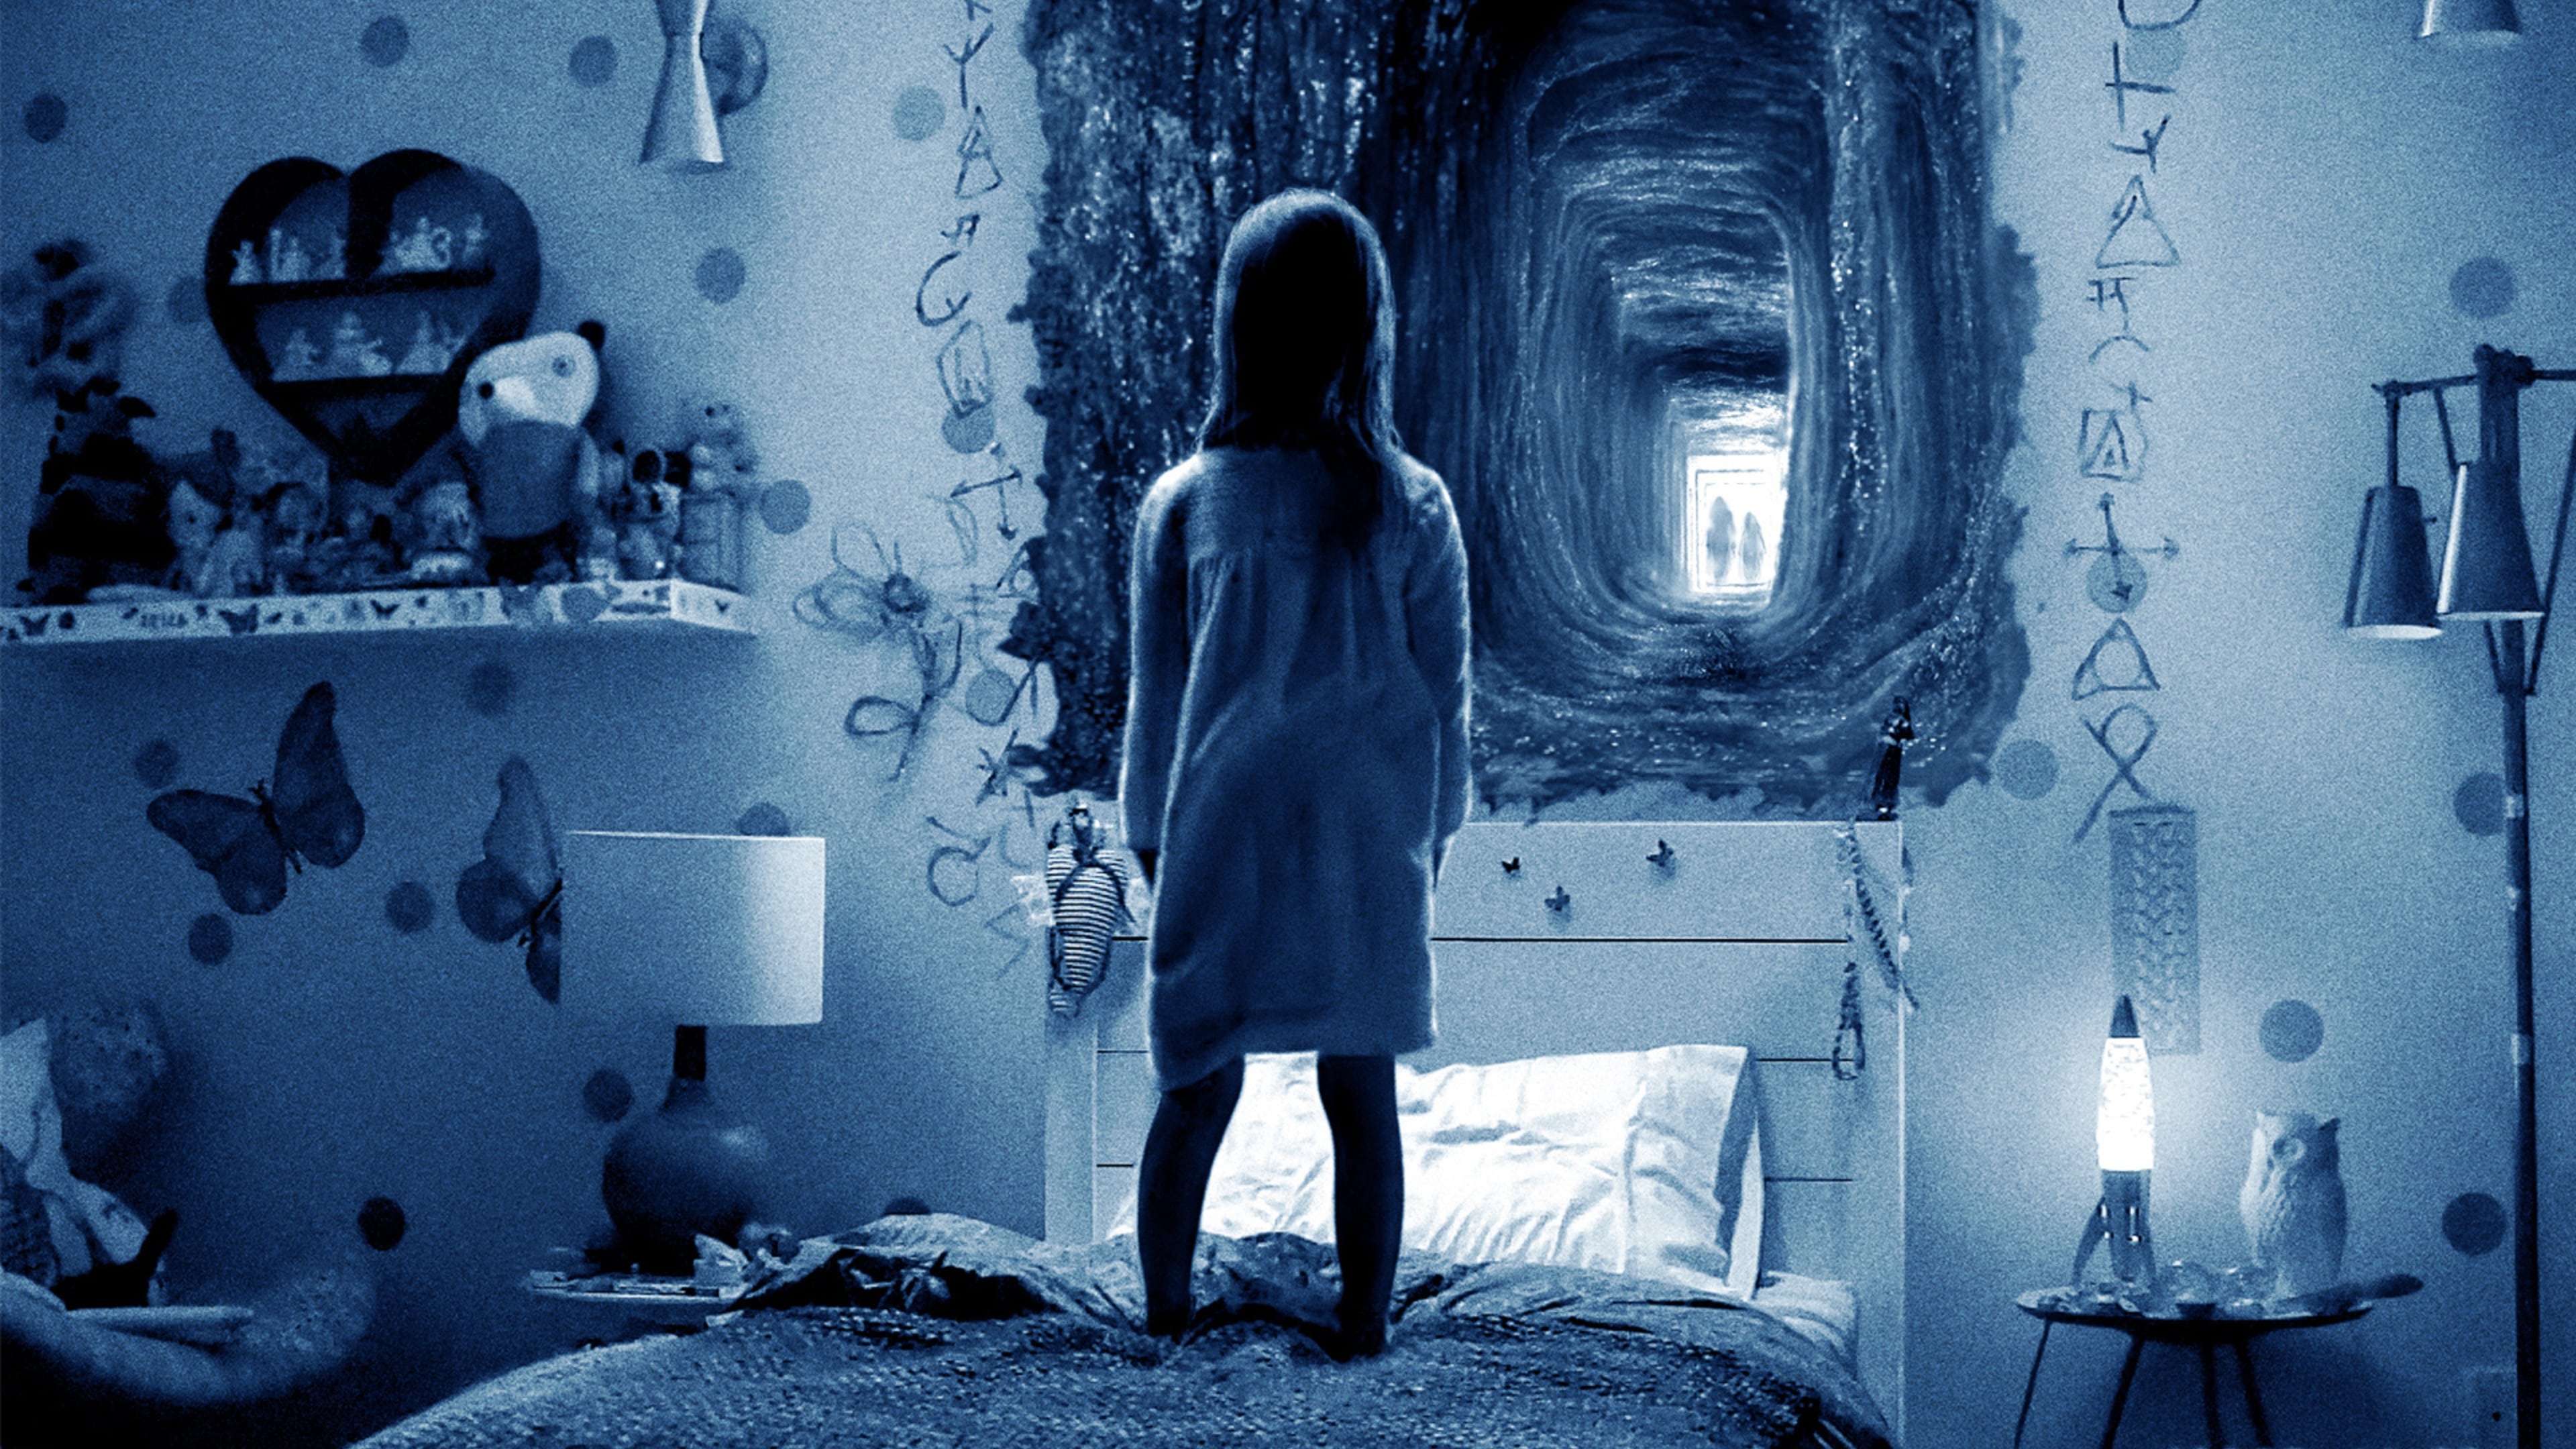 Paranormal Activity 5: Ghost Dimension (2015)